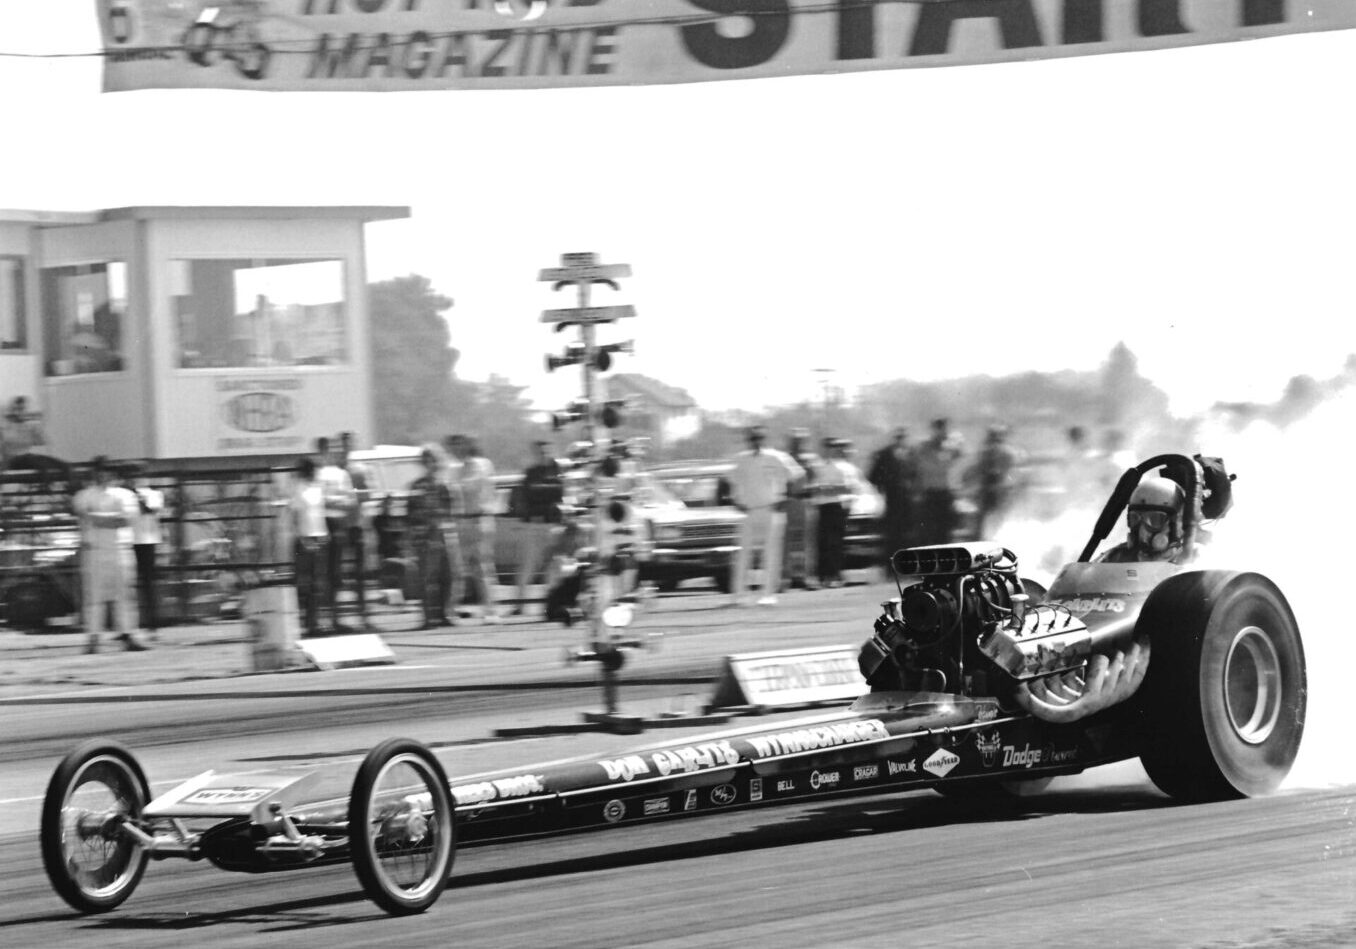 Built in the spring of 1968 by Don Garlits and Bob Taaffe at Seffner, Florida. Swamp Rat 12 became the first dragster over 240 MPH at Alton, Illinois. Later in the year Swamp Rat 12 won the “Springnationals” in Englishtown, NJ and the prestigious US Nationals in Indianapolis. During the Fall of 1968 Swamp Rat 12 was fitted with a Trick Tom Hanna body and paint by Carter. Swamp Rat 12 would have a top speed of 240 MPH and 6.80 second ET. 